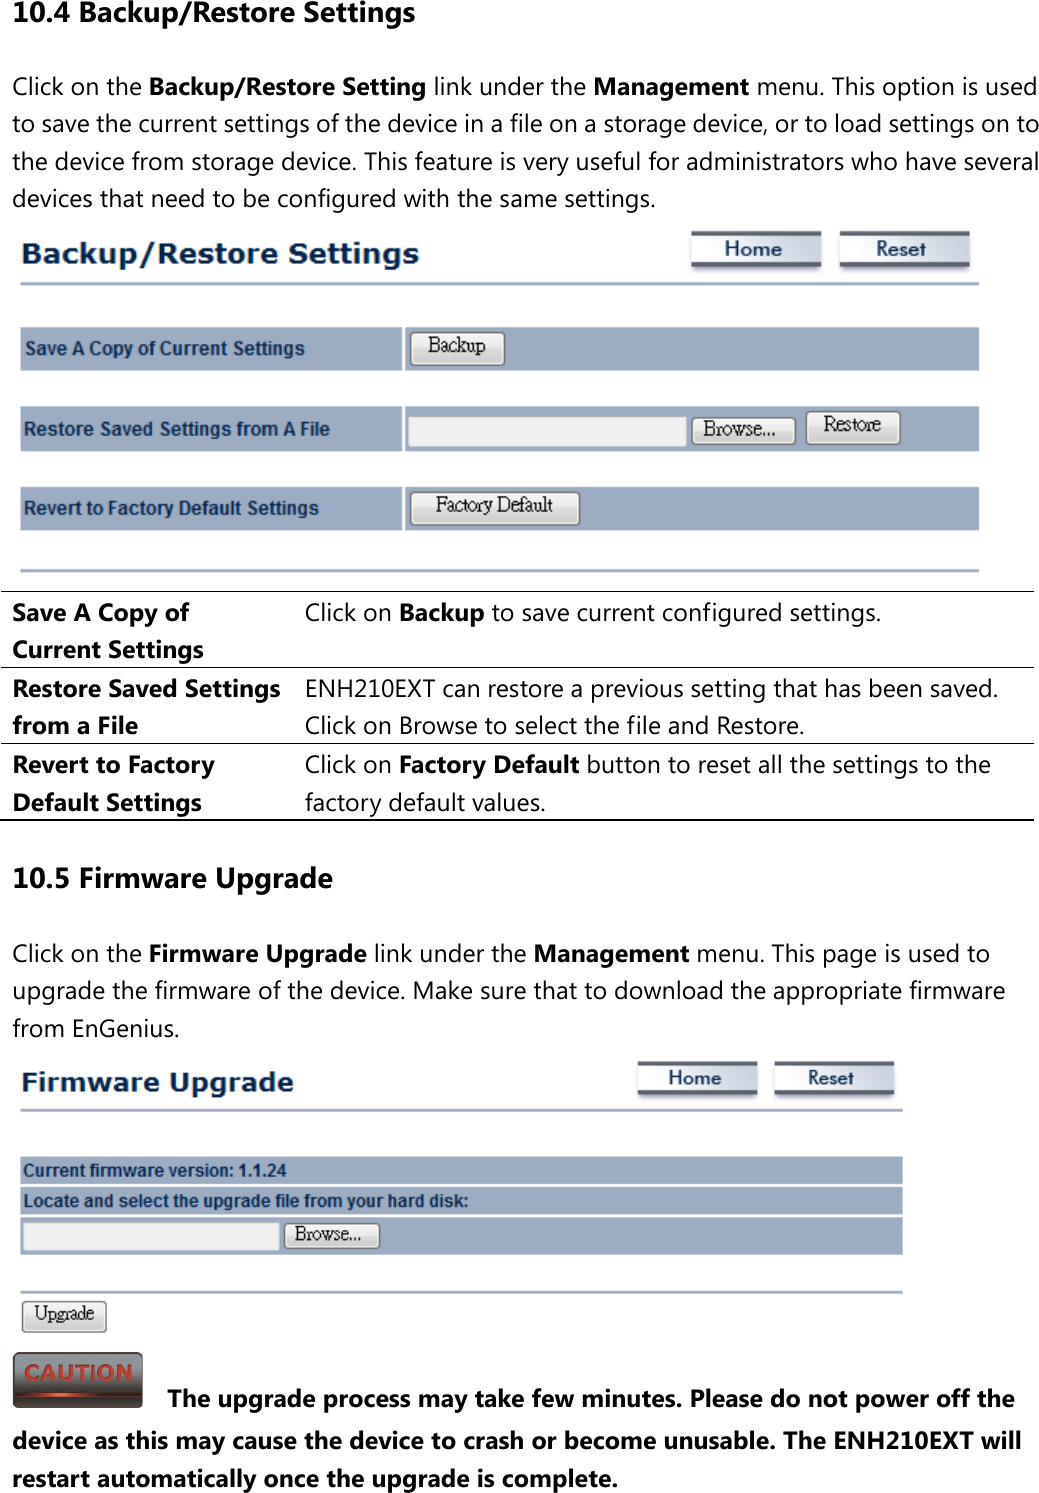 10.4 Backup/Restore Settings Click on the Backup/Restore Setting link under the Management menu. This option is used to save the current settings of the device in a file on a storage device, or to load settings on to the device from storage device. This feature is very useful for administrators who have several devices that need to be configured with the same settings.  Save A Copy of Current Settings Click on Backup to save current configured settings. Restore Saved Settings from a File ENH210EXT can restore a previous setting that has been saved. Click on Browse to select the file and Restore. Revert to Factory Default Settings Click on Factory Default button to reset all the settings to the factory default values. 10.5 Firmware Upgrade Click on the Firmware Upgrade link under the Management menu. This page is used to upgrade the firmware of the device. Make sure that to download the appropriate firmware from EnGenius.      The upgrade process may take few minutes. Please do not power off the device as this may cause the device to crash or become unusable. The ENH210EXT will restart automatically once the upgrade is complete. 